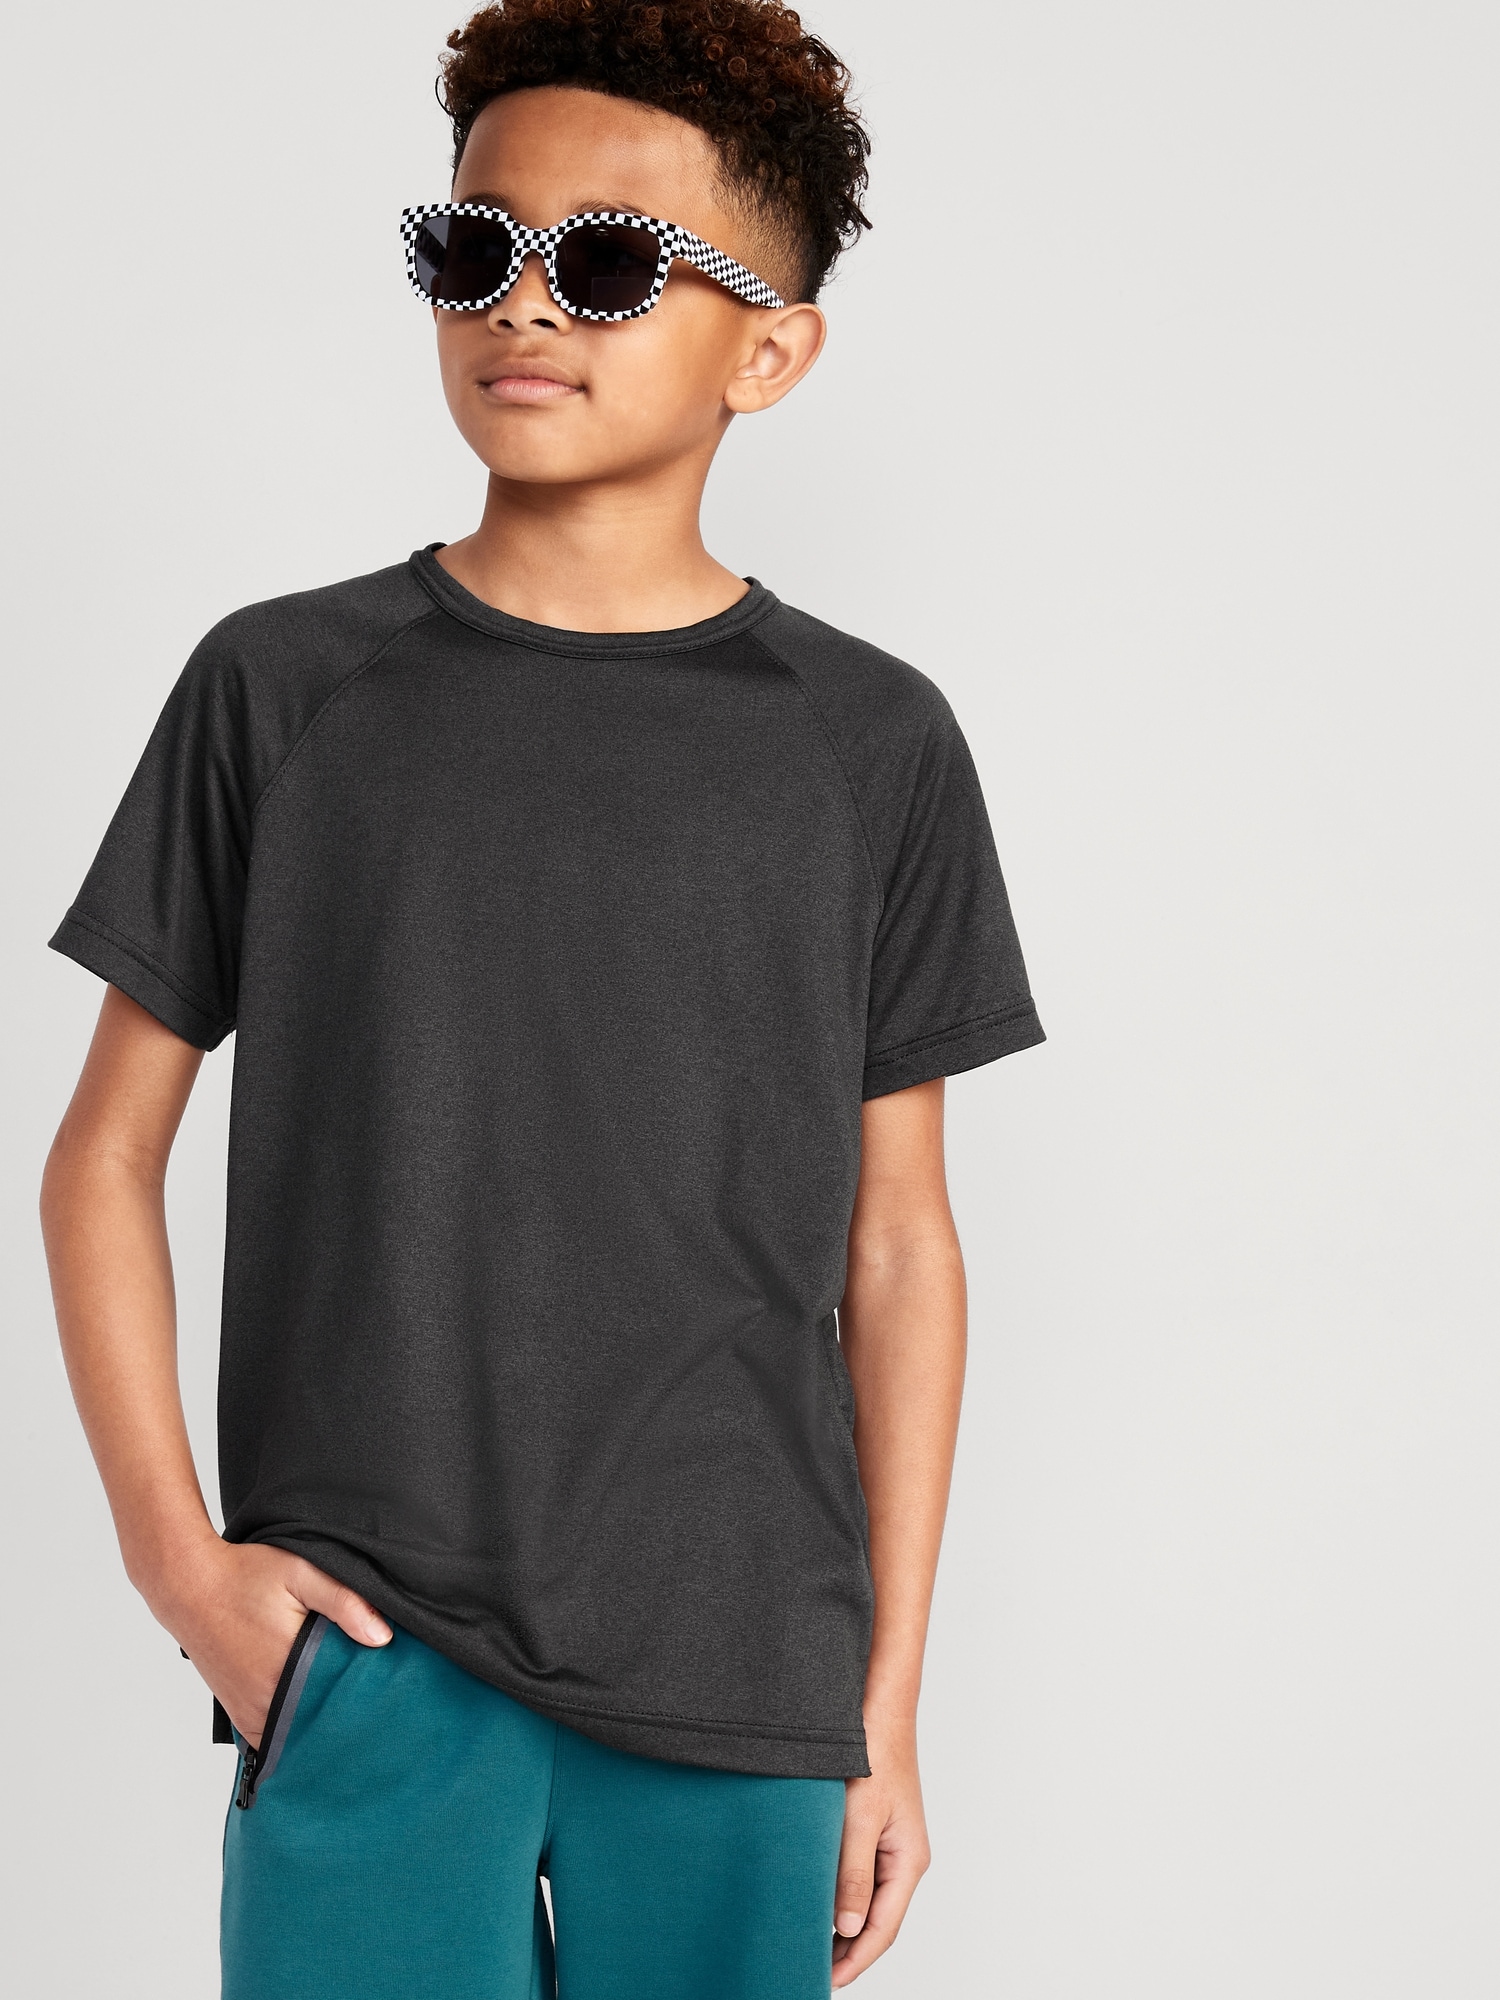 Go-Dry Base Layer Tights For Boys